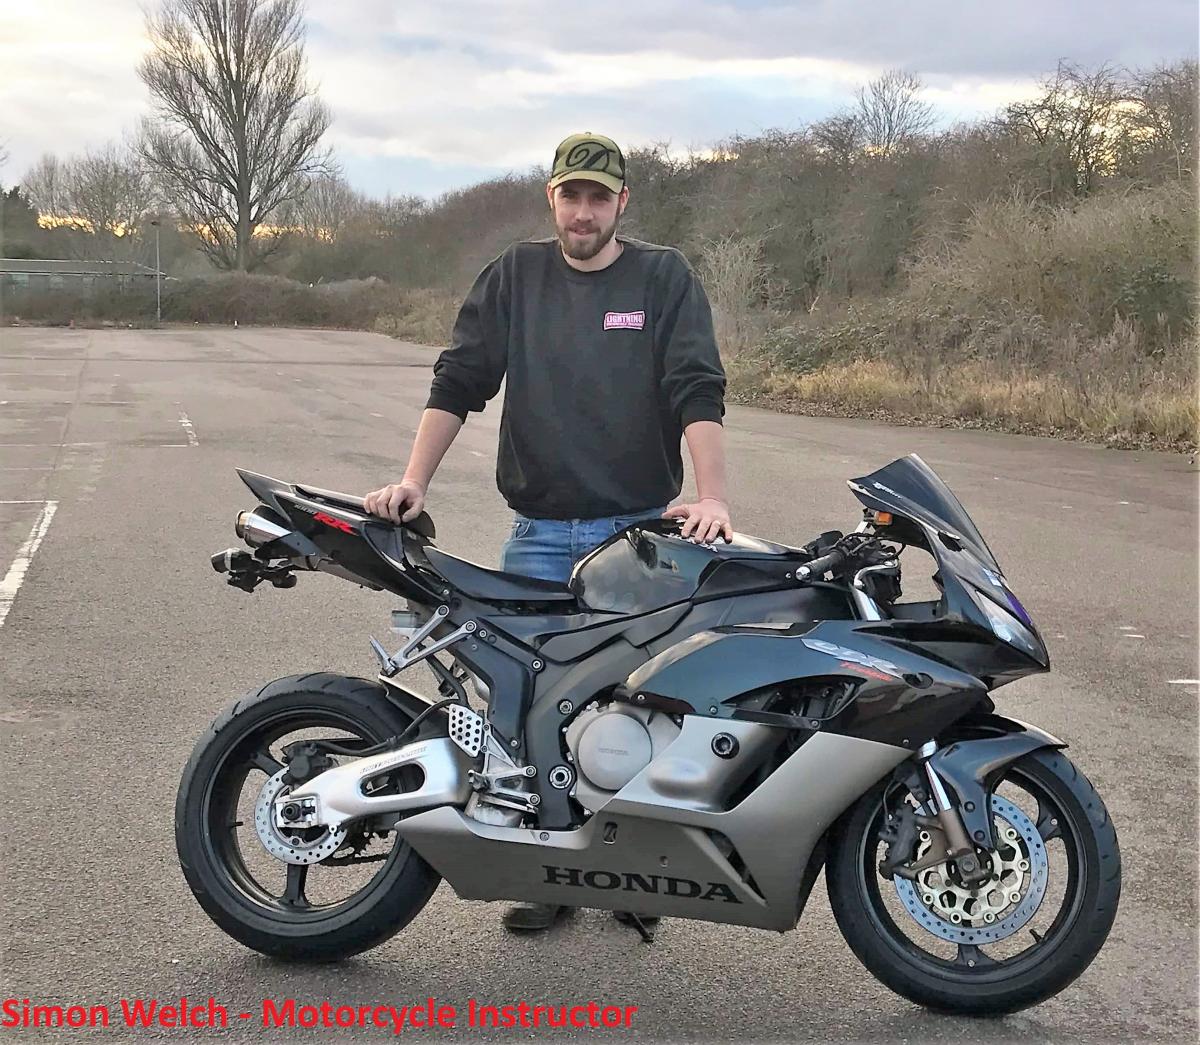 Simon Welch - Motorcycle Instructor